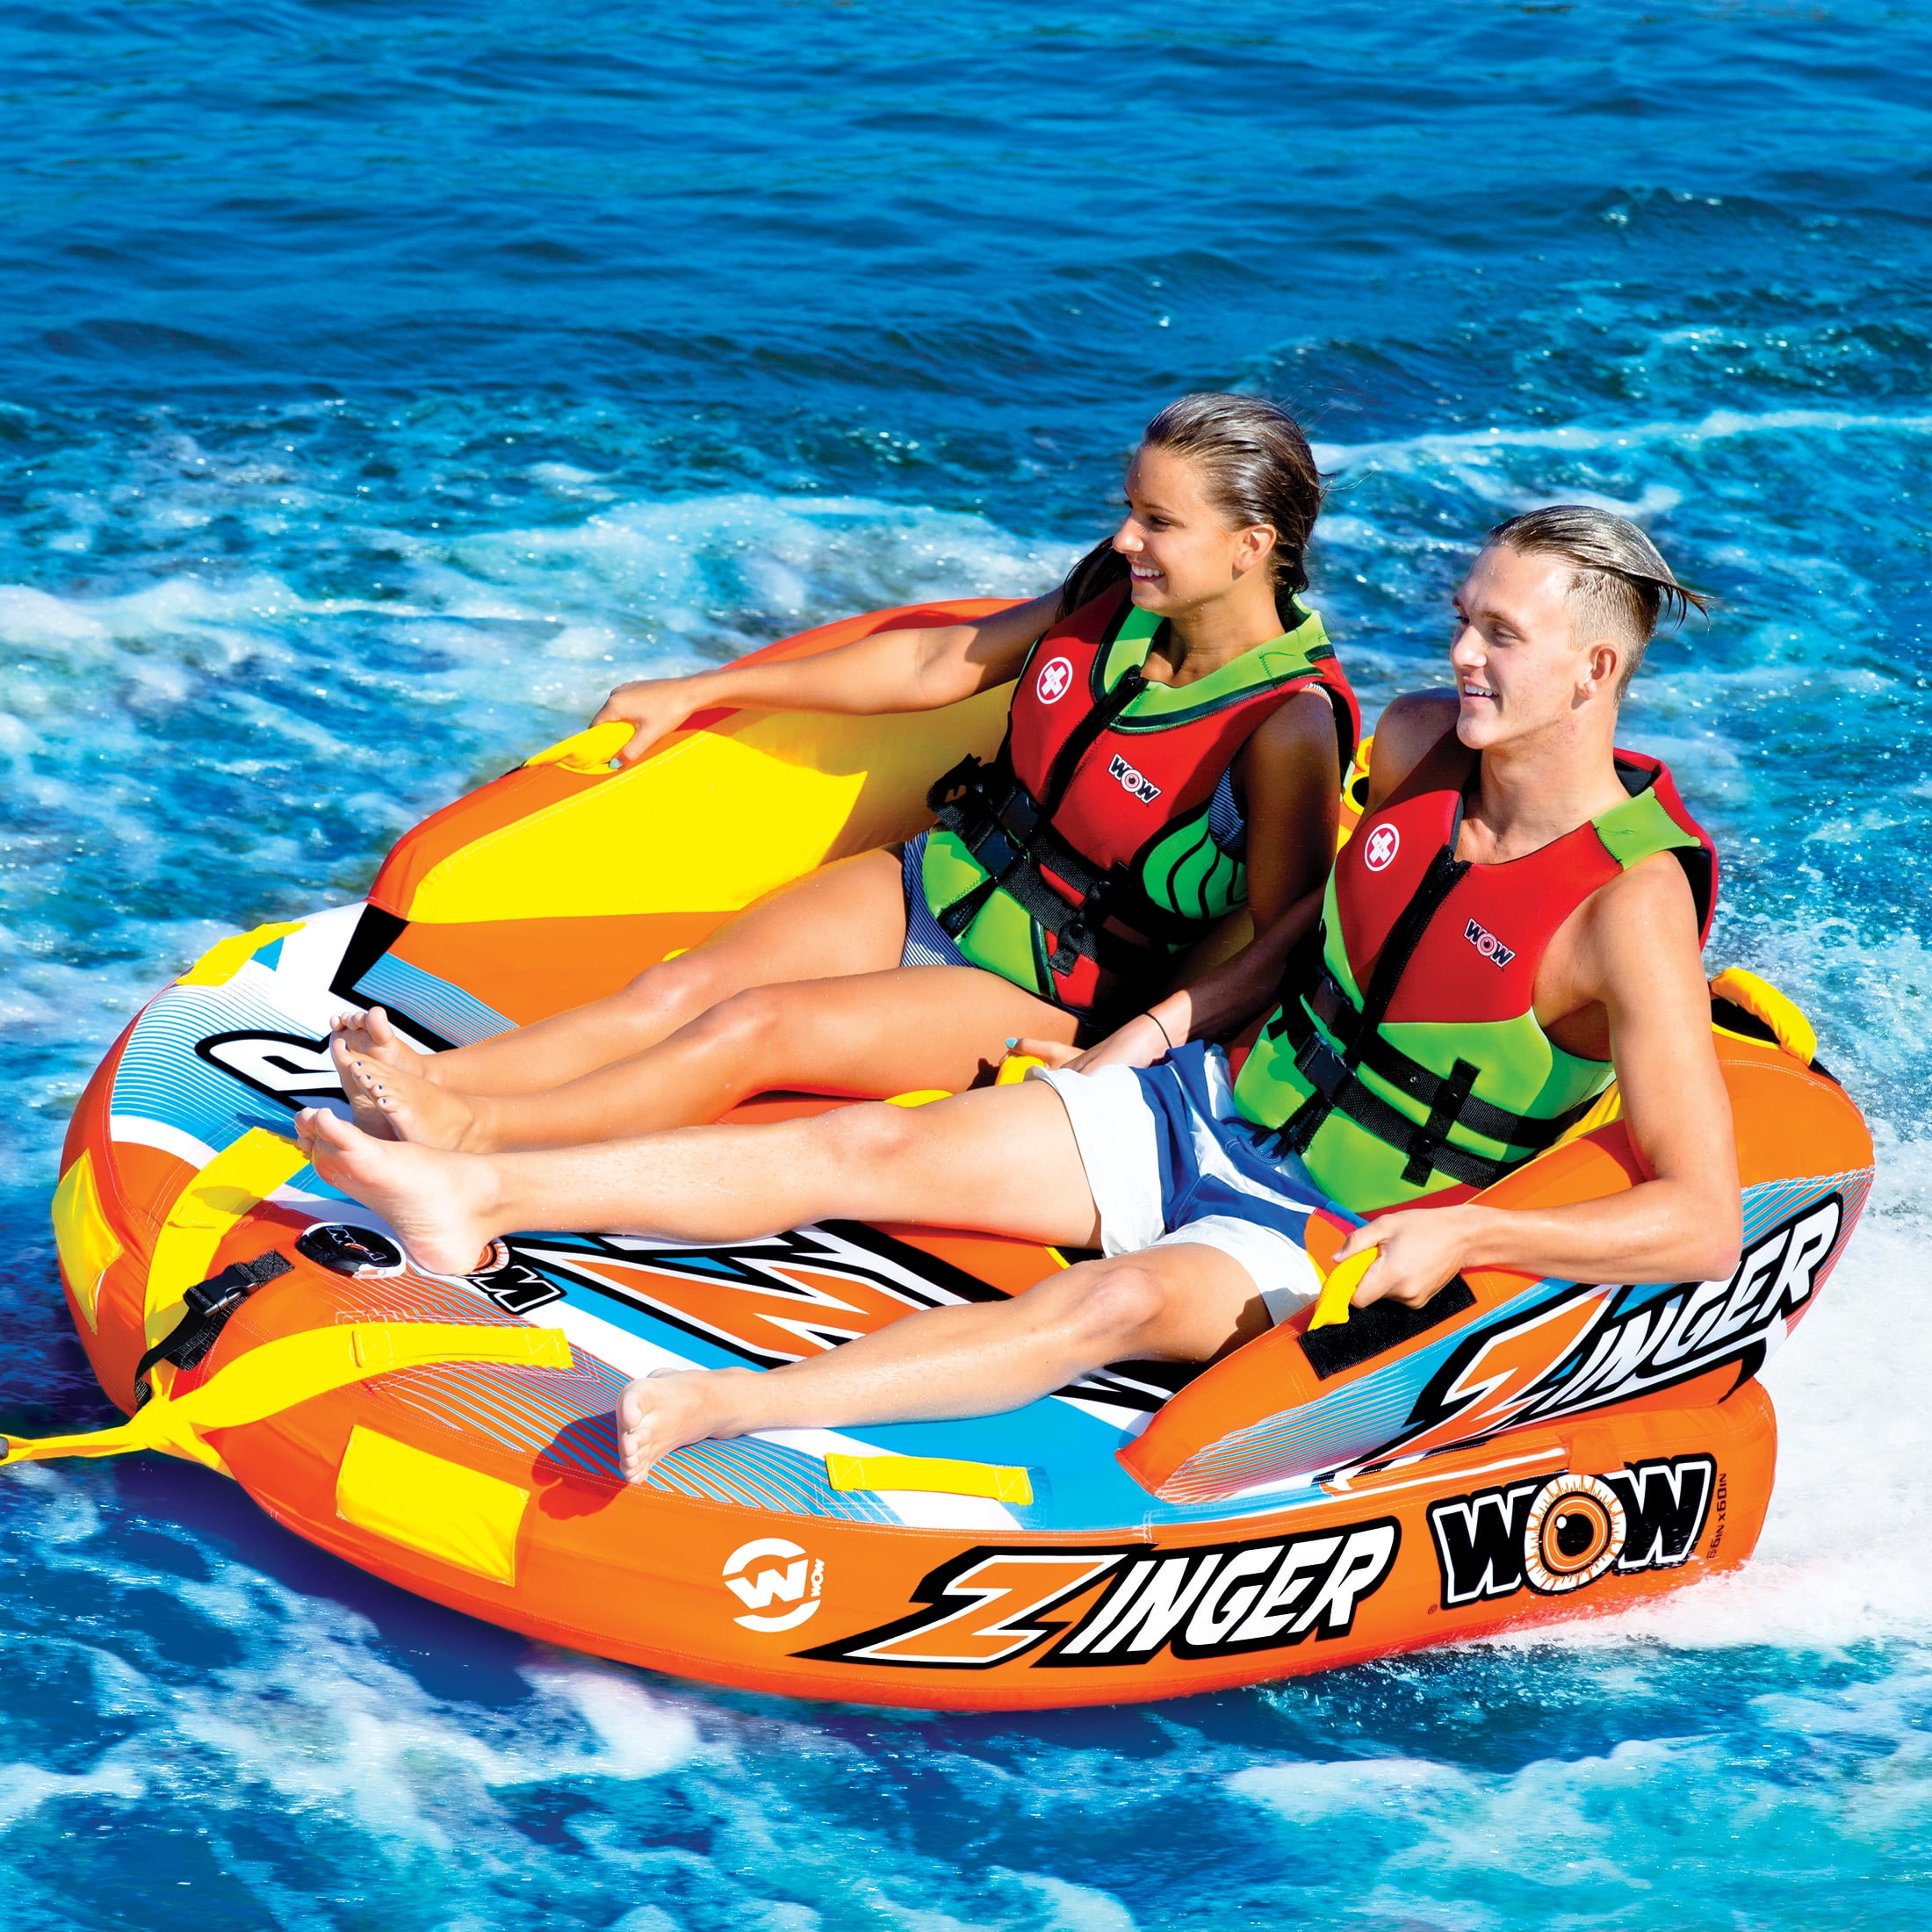 WOW World of Watersports, 15-1120, Ace Racing Towable, Ski Tube, 1 